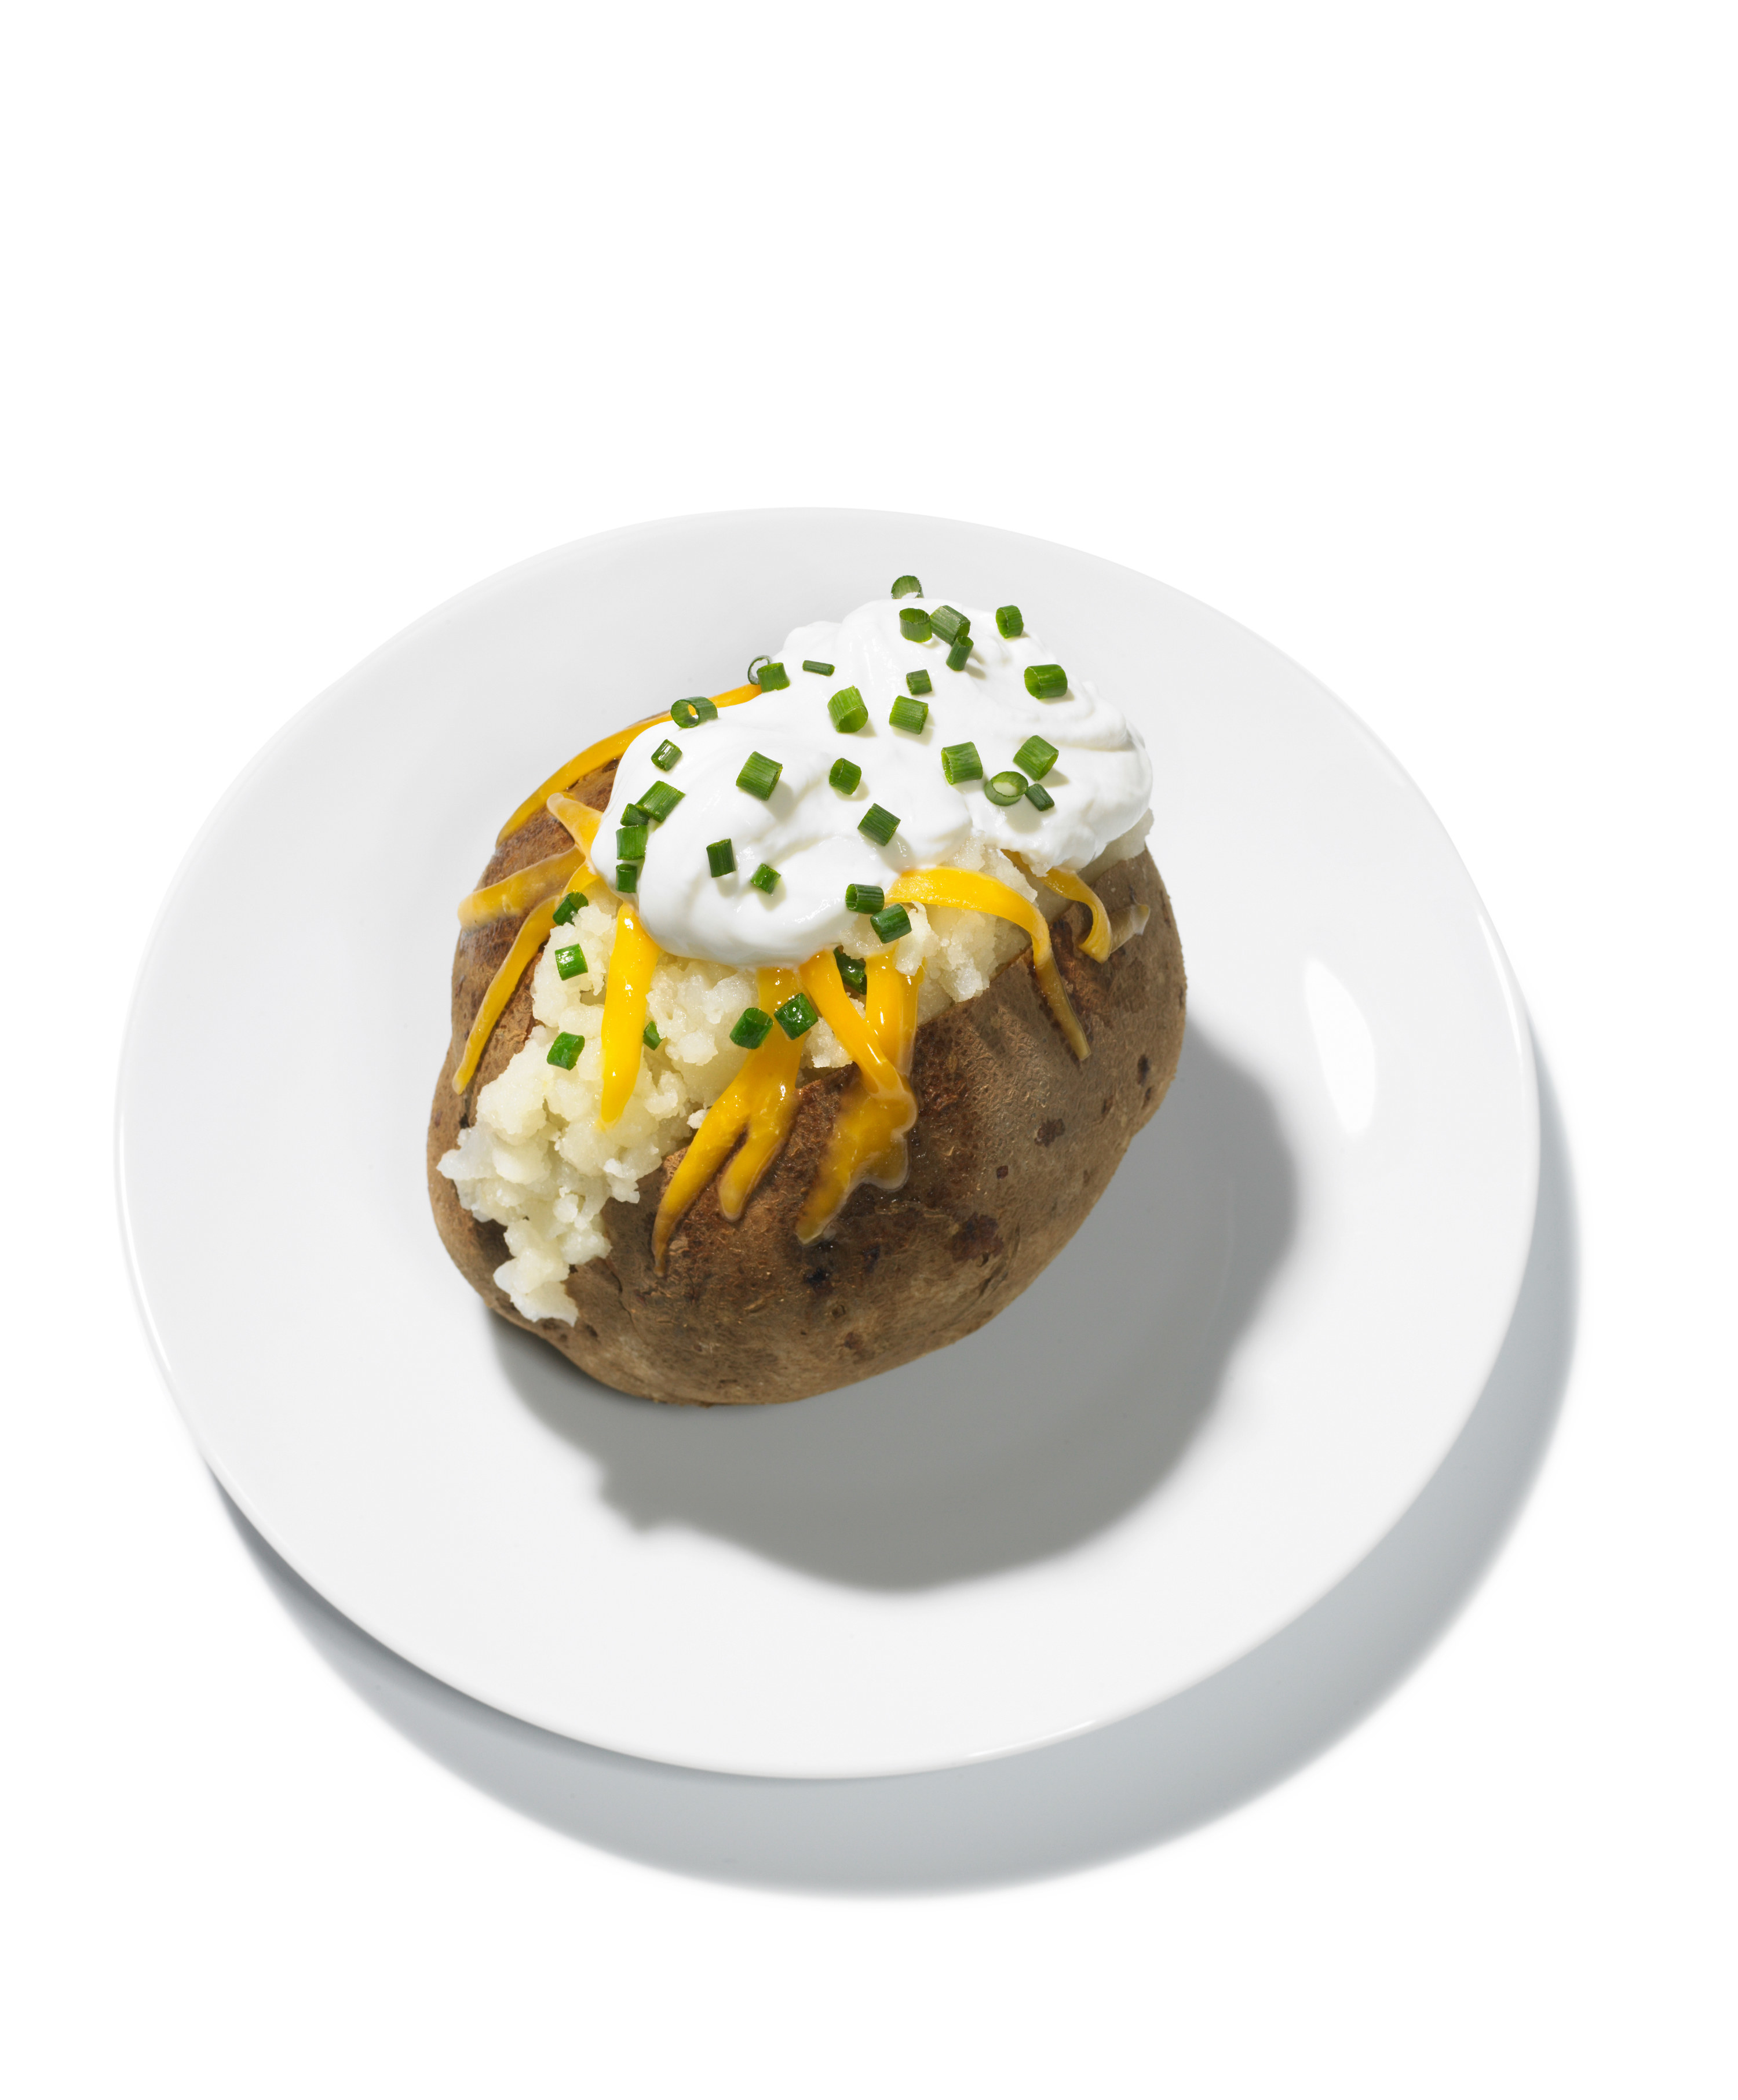 Baked potato with cheese, chives, and sour cream on a white plate